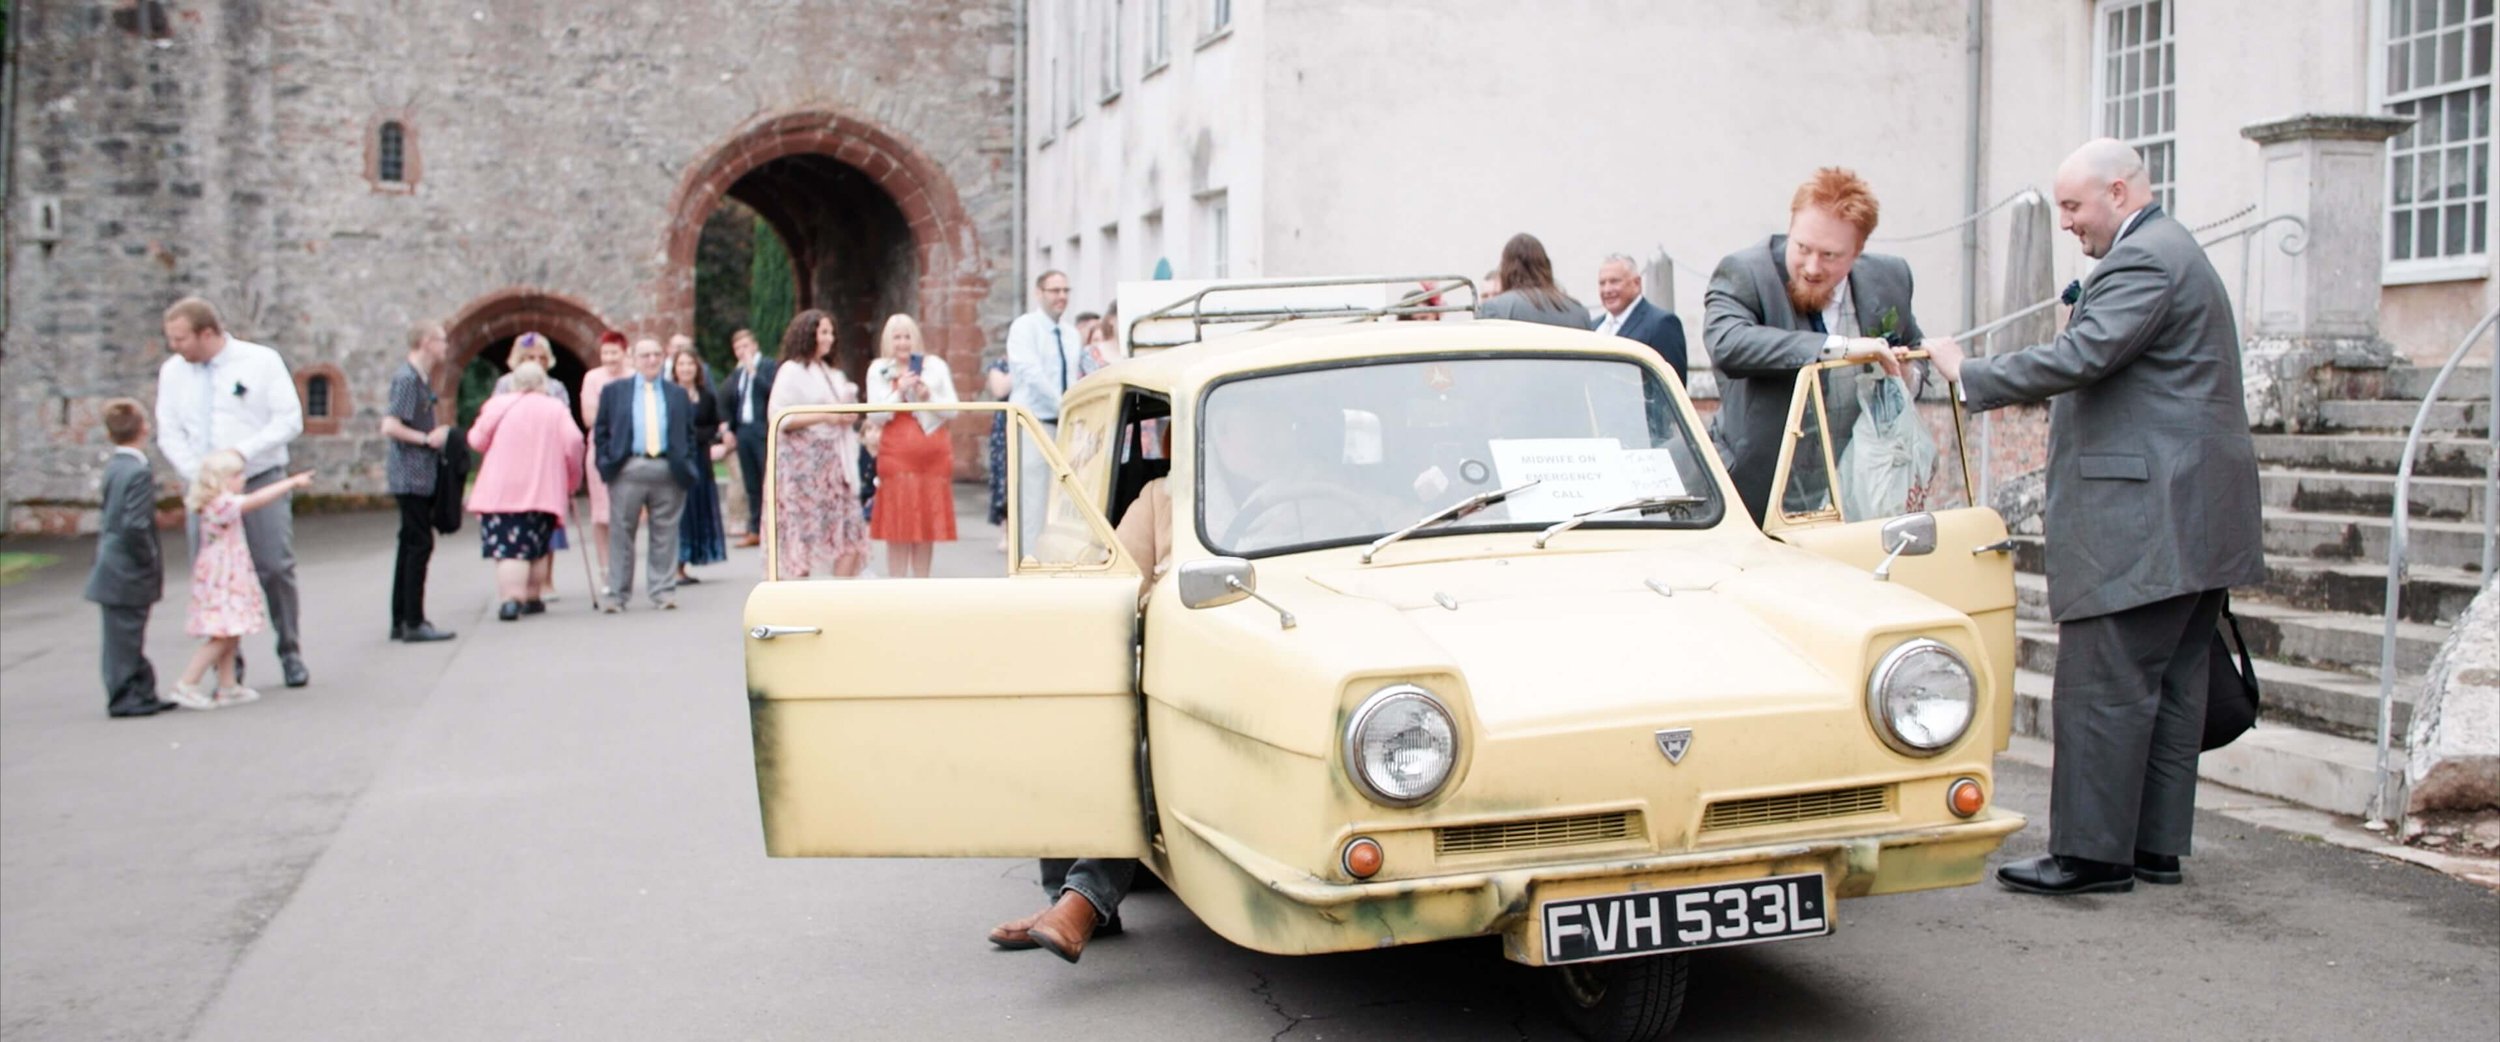 Best man exits the Only Fools and Horses themed 3-Wheeler car with a Del Boy impersonator and enters wedding ceremony